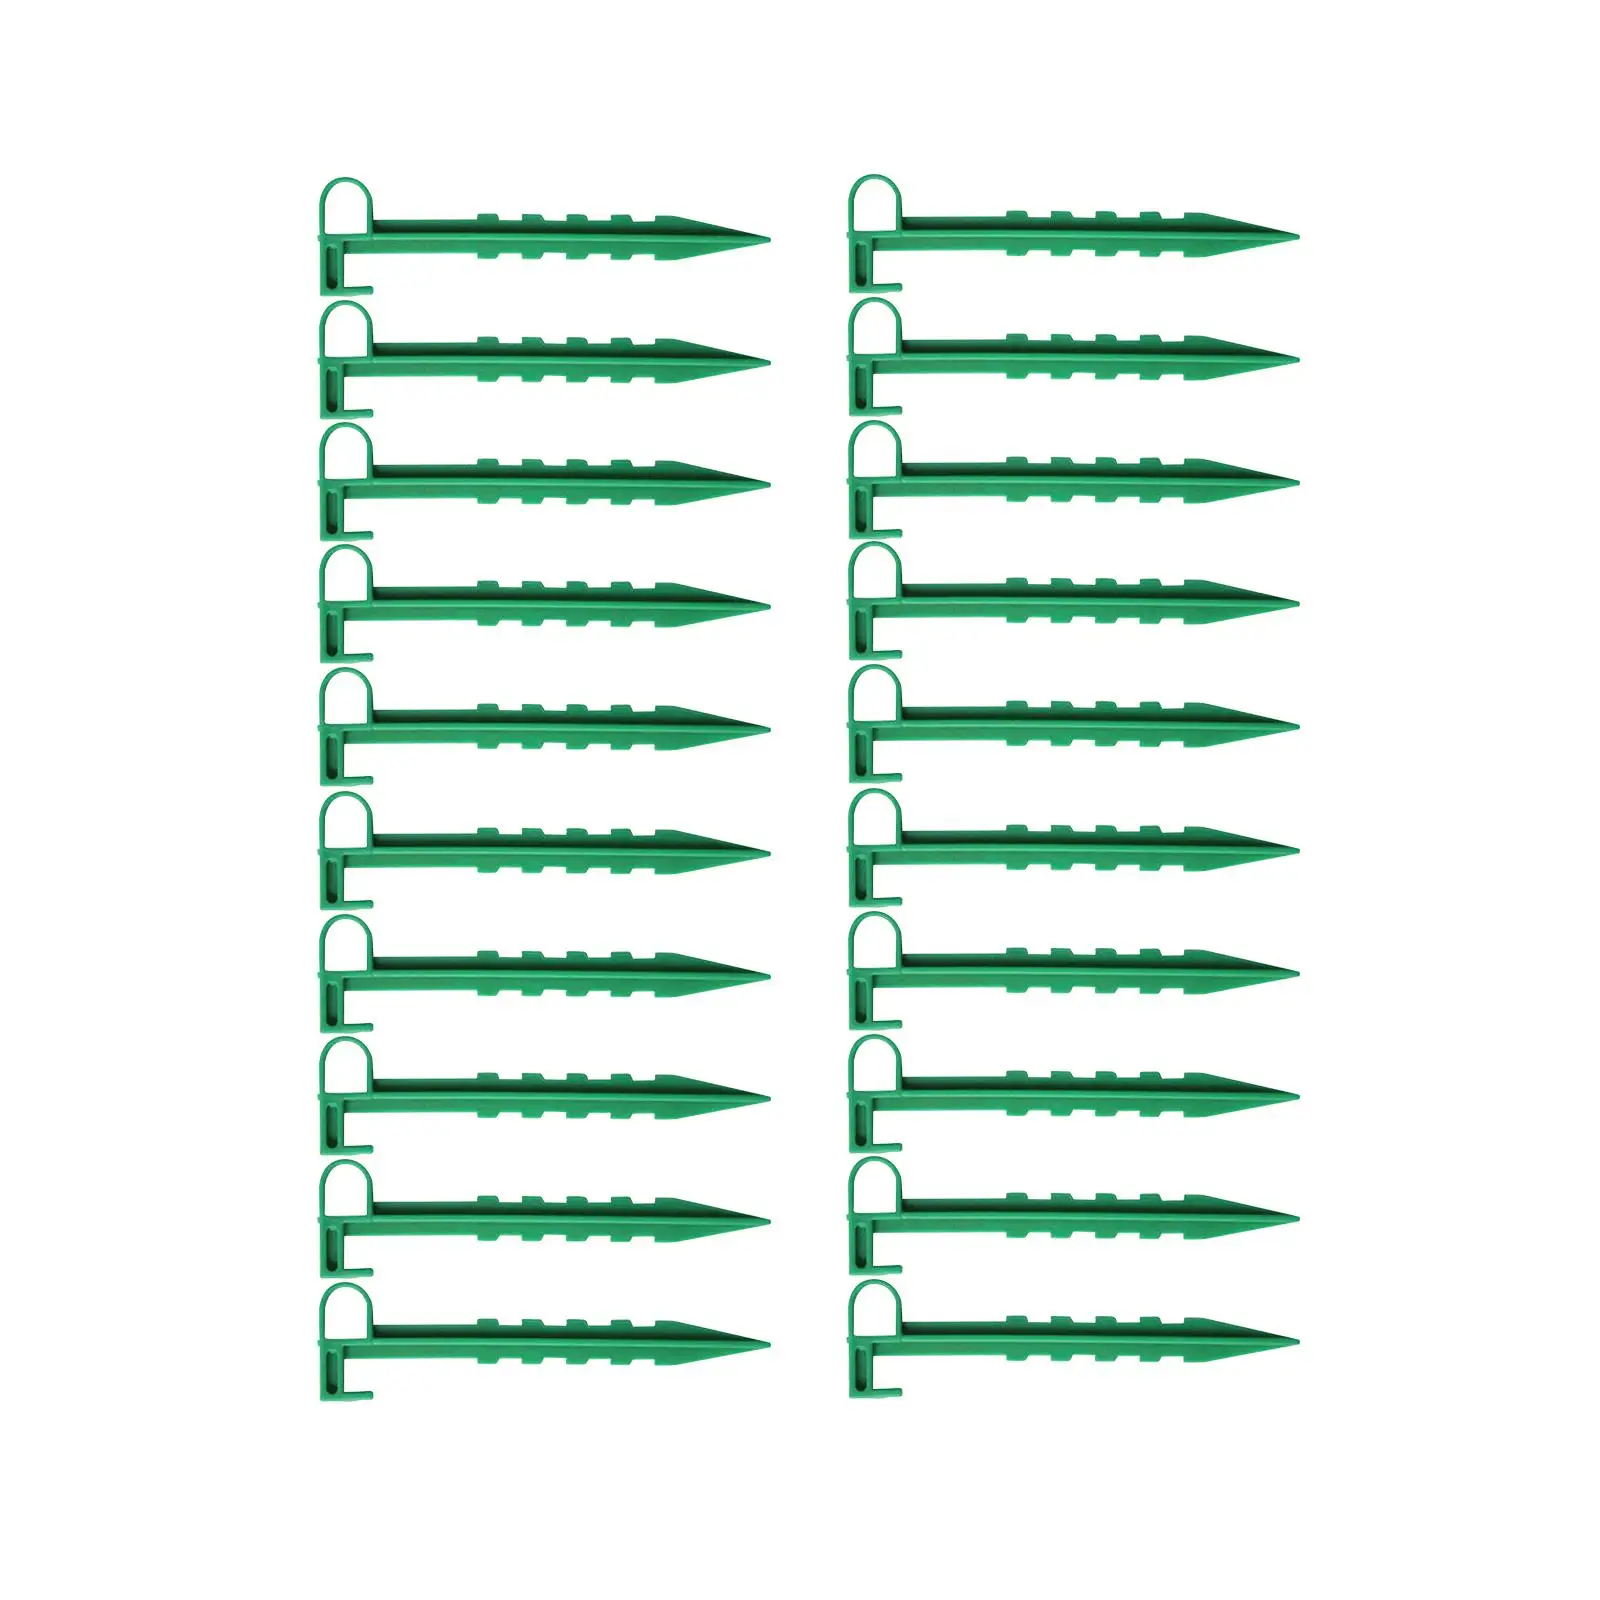 20x Garden Stakes Tarp Stakes Yard Ground Cover Fixing Anchor Pegs for Tents Securing Keeping Garden Netting Down Greenhouse